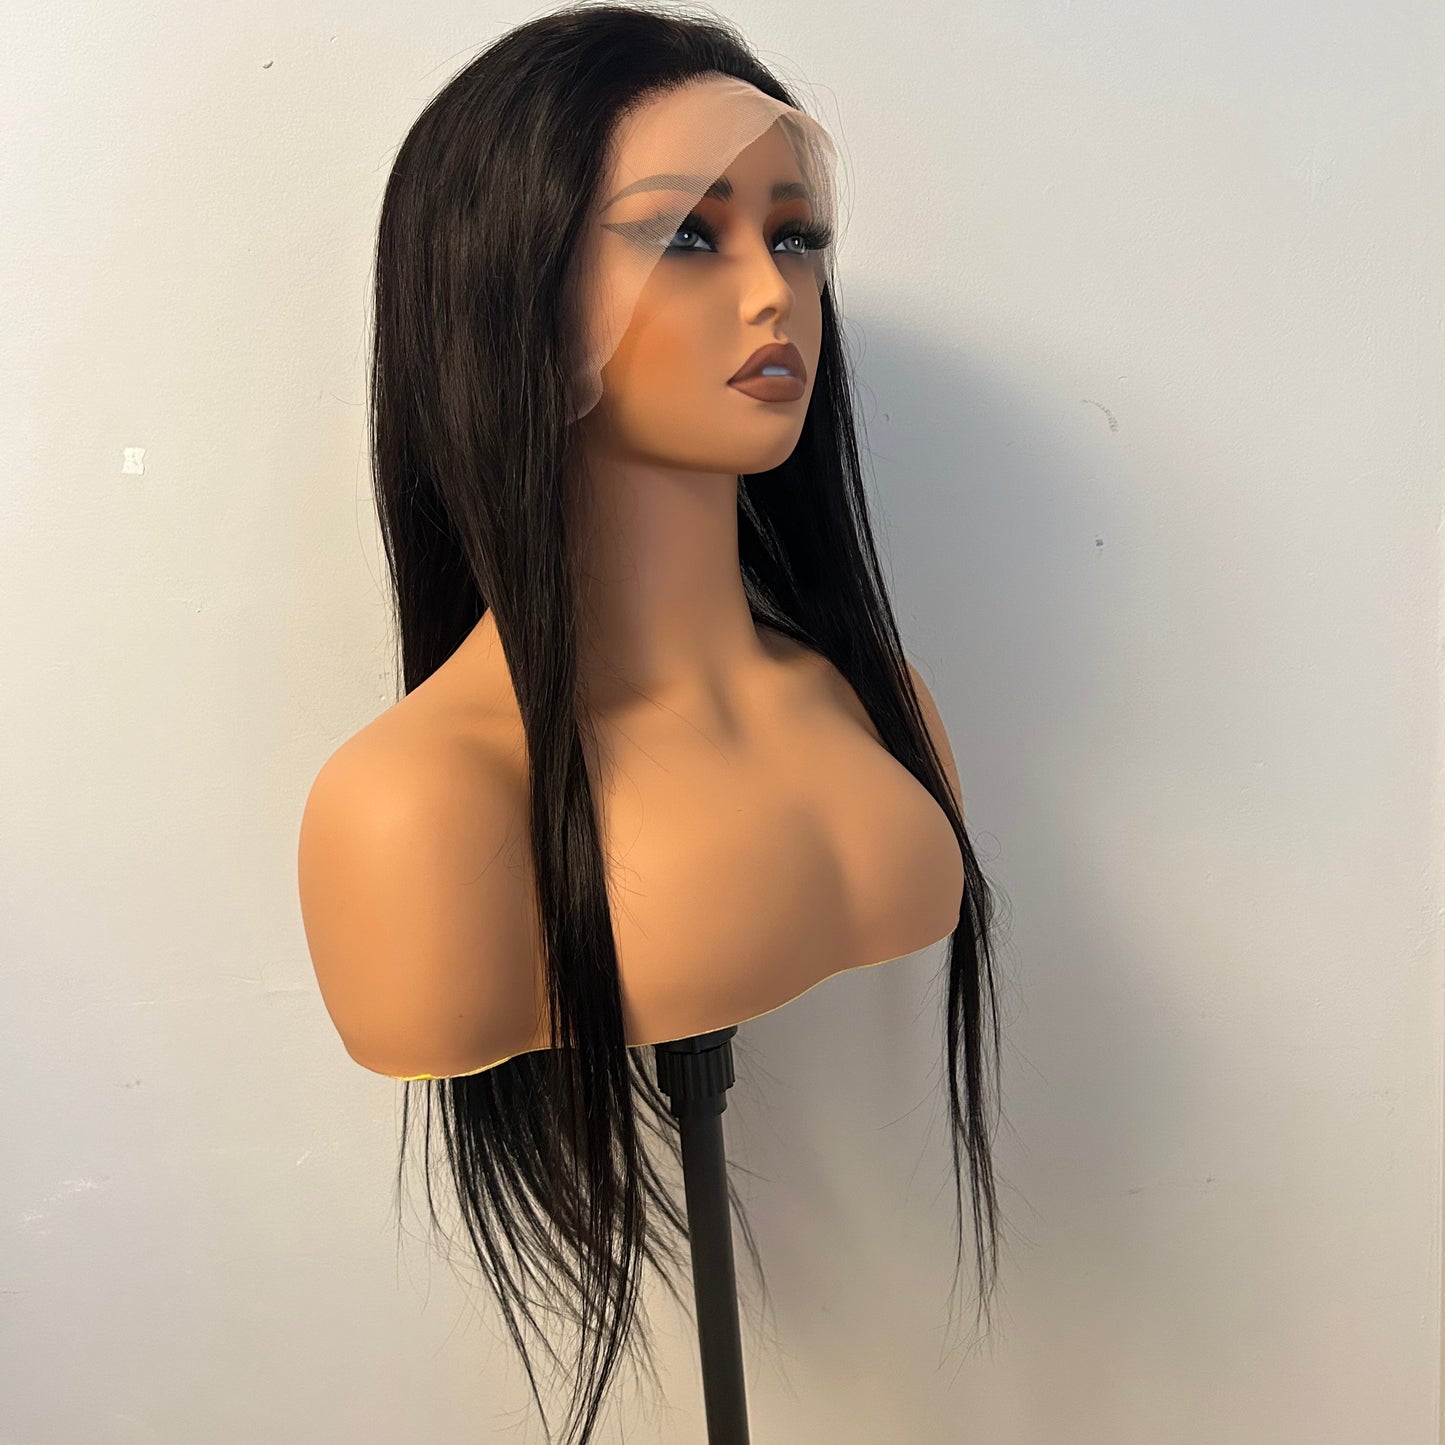 24inch Human Hair Wig Frontal 13x4 Lace Straight WF603024